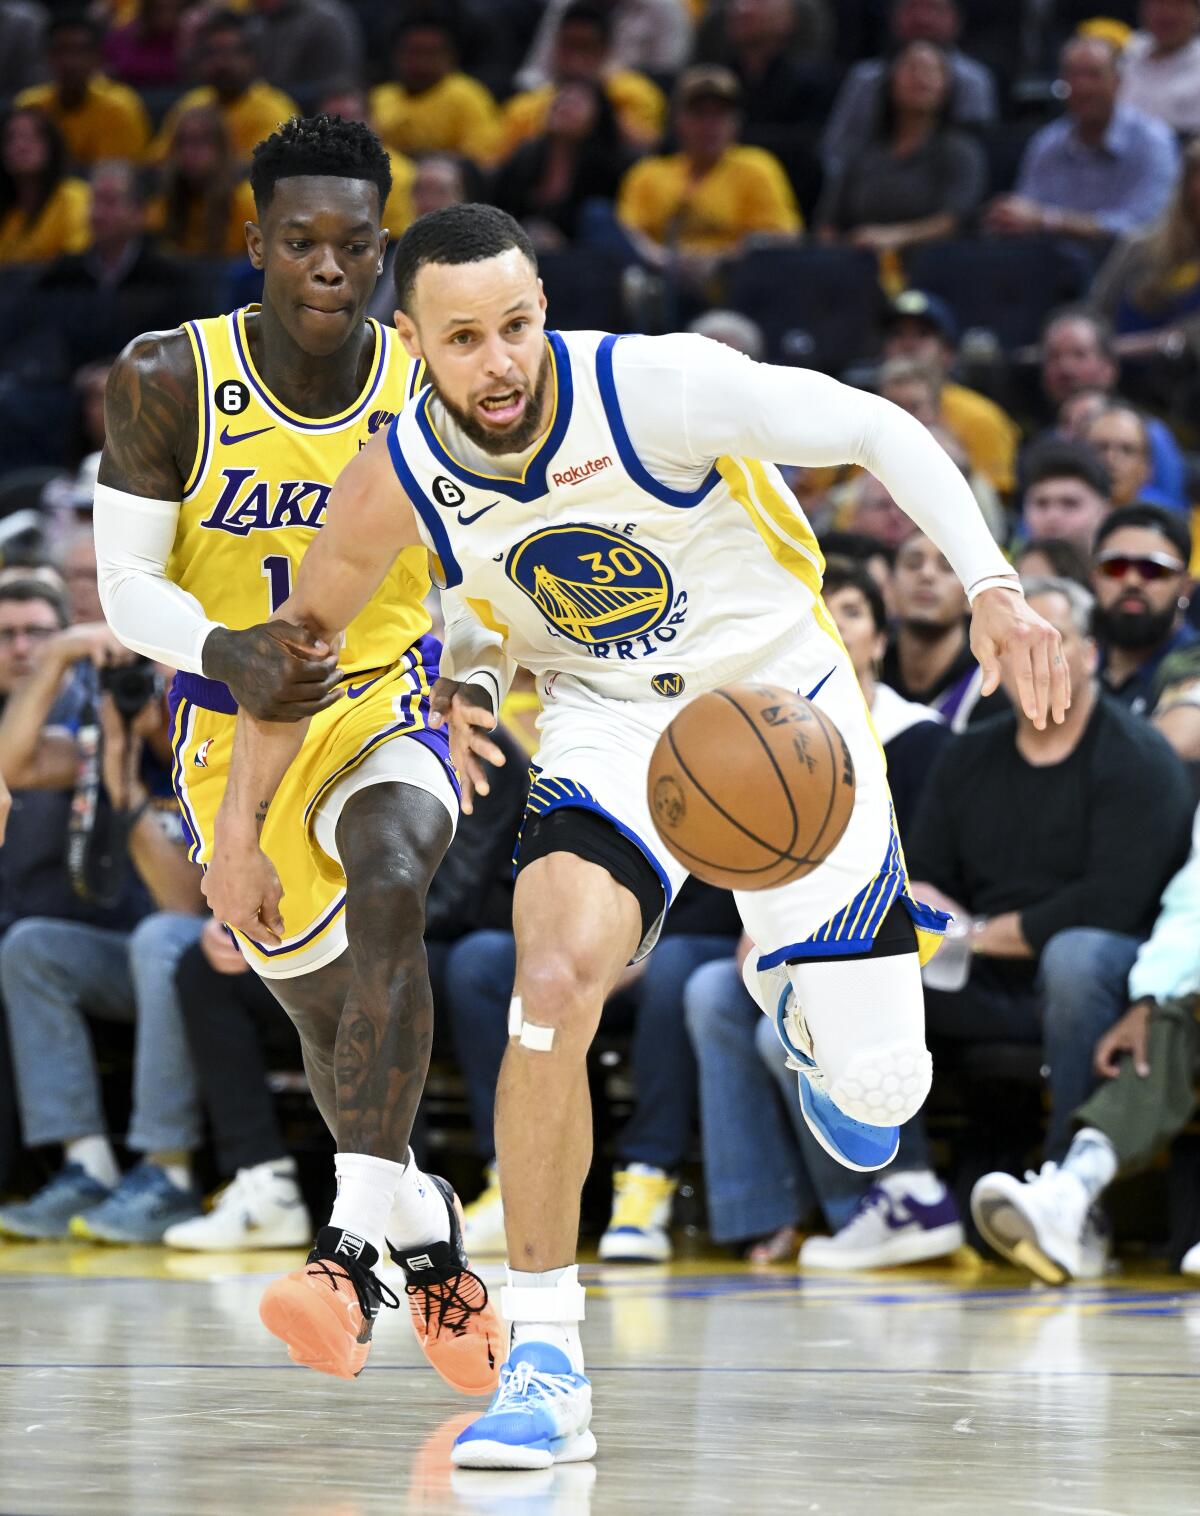 Lakers guard Dennis Schroder, left, grabs onto the arm of Warriors guard Stephen Curry as he dribbled up court during Game 5.